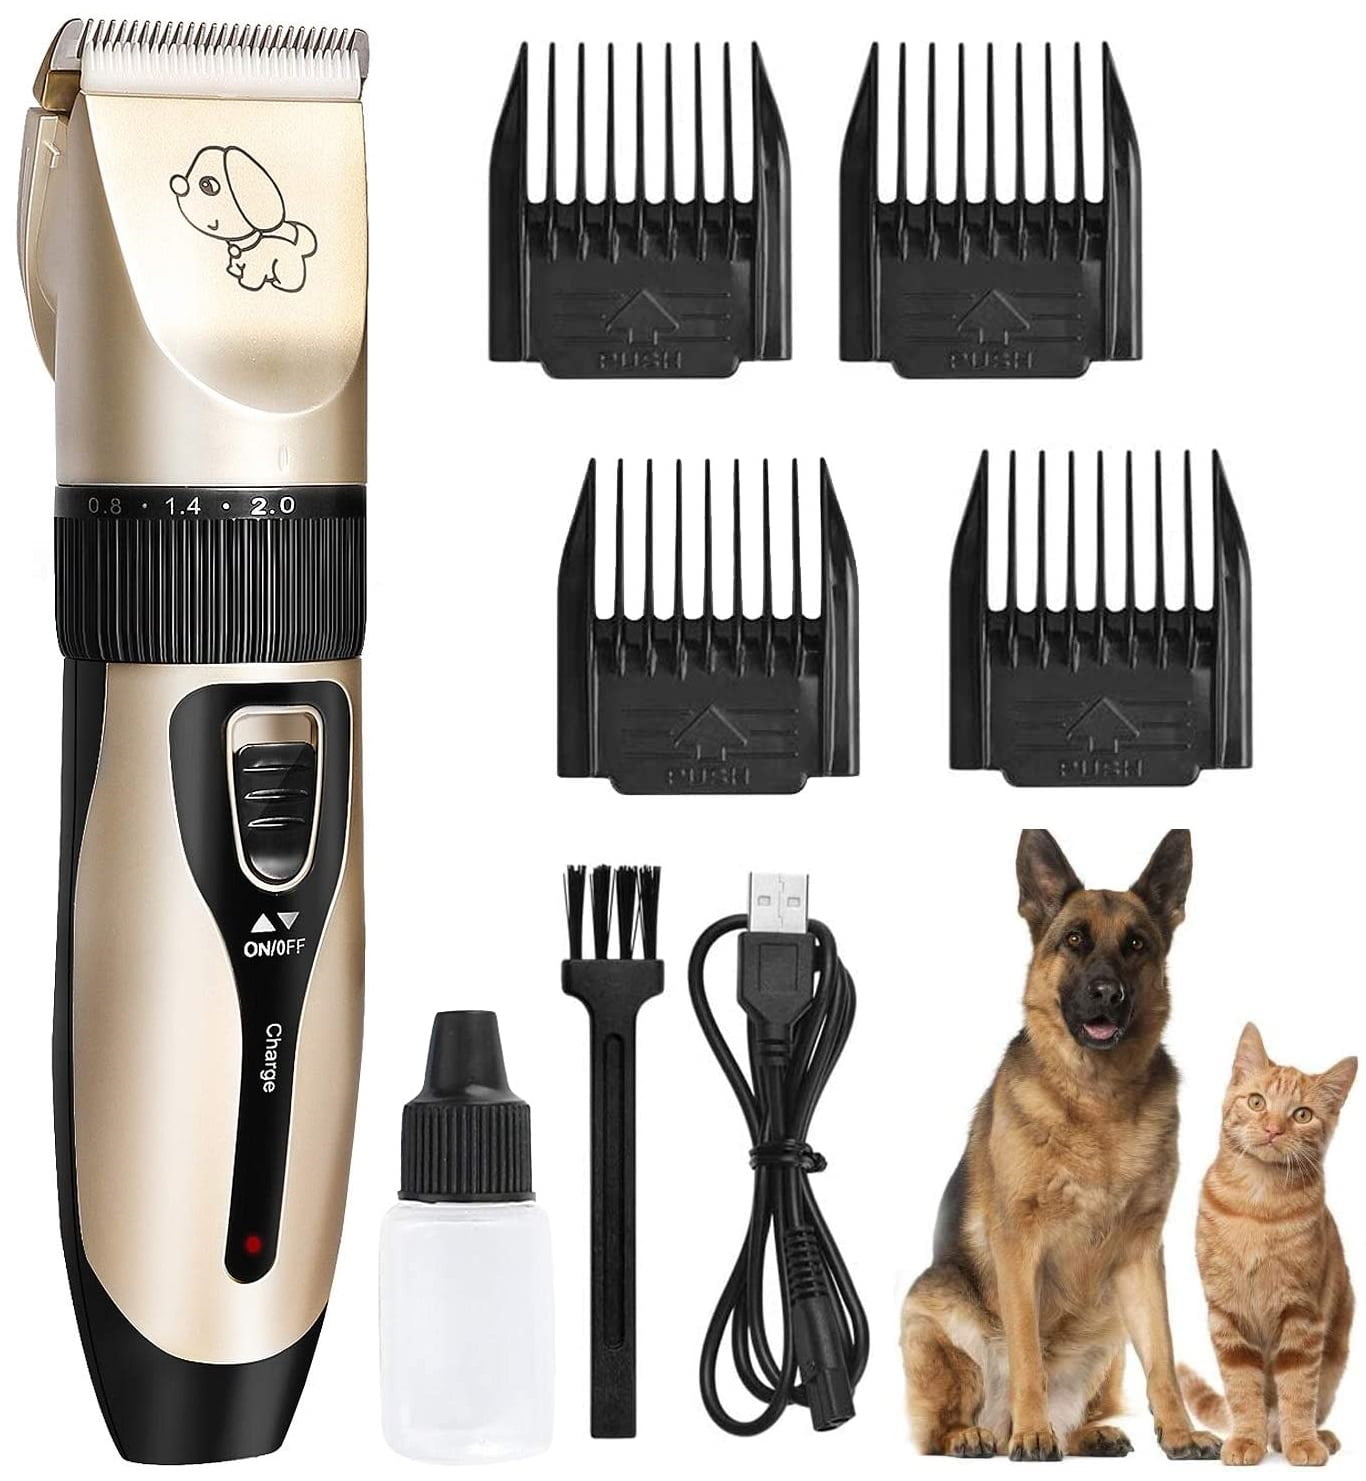 UUGEE Dog Clippers Grooming Kit for Dogs with Thick Coats Rechargeable ...